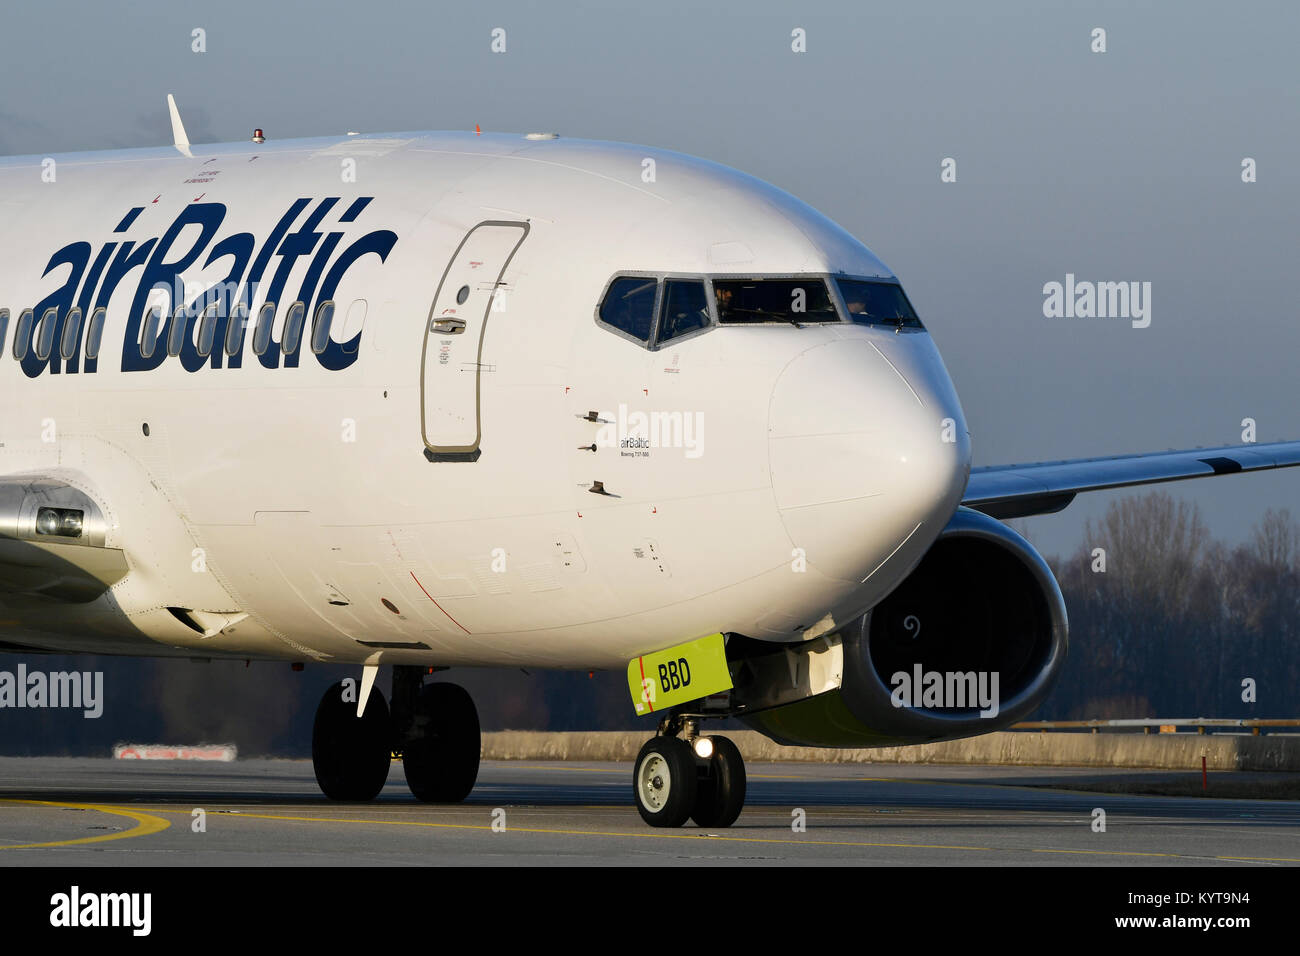 airbaltic, Air Baltic, Boeing, B737, nose gear, wheel, tire, roll in, landing, taxiway, runway, Munich Airport, Upper Bavaria, Germany Stock Photo